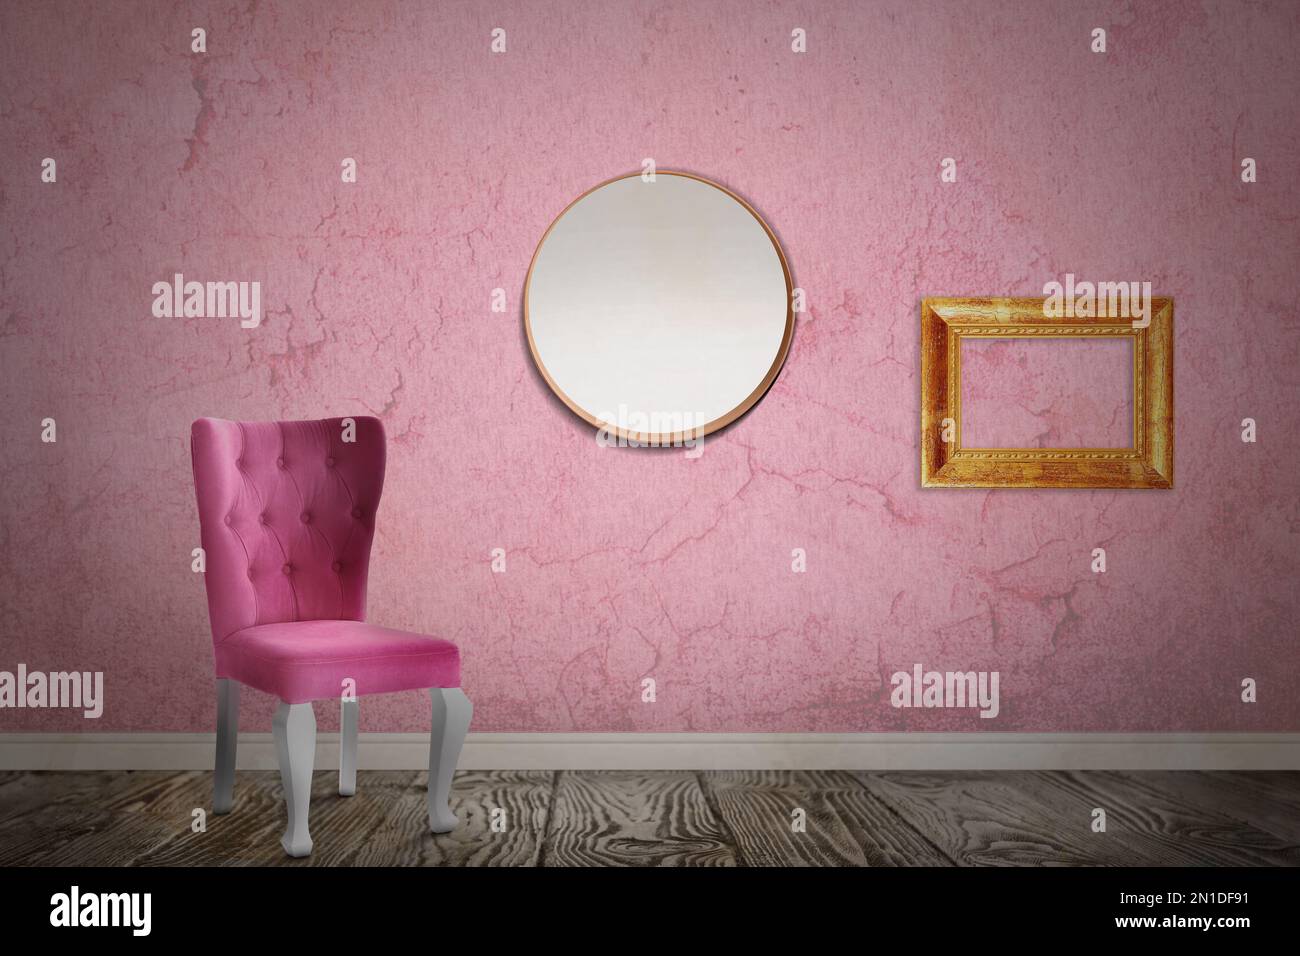 Chair near wall with mirror, wooden frame and patterned wallpaper. Stylish room interior Stock Photo